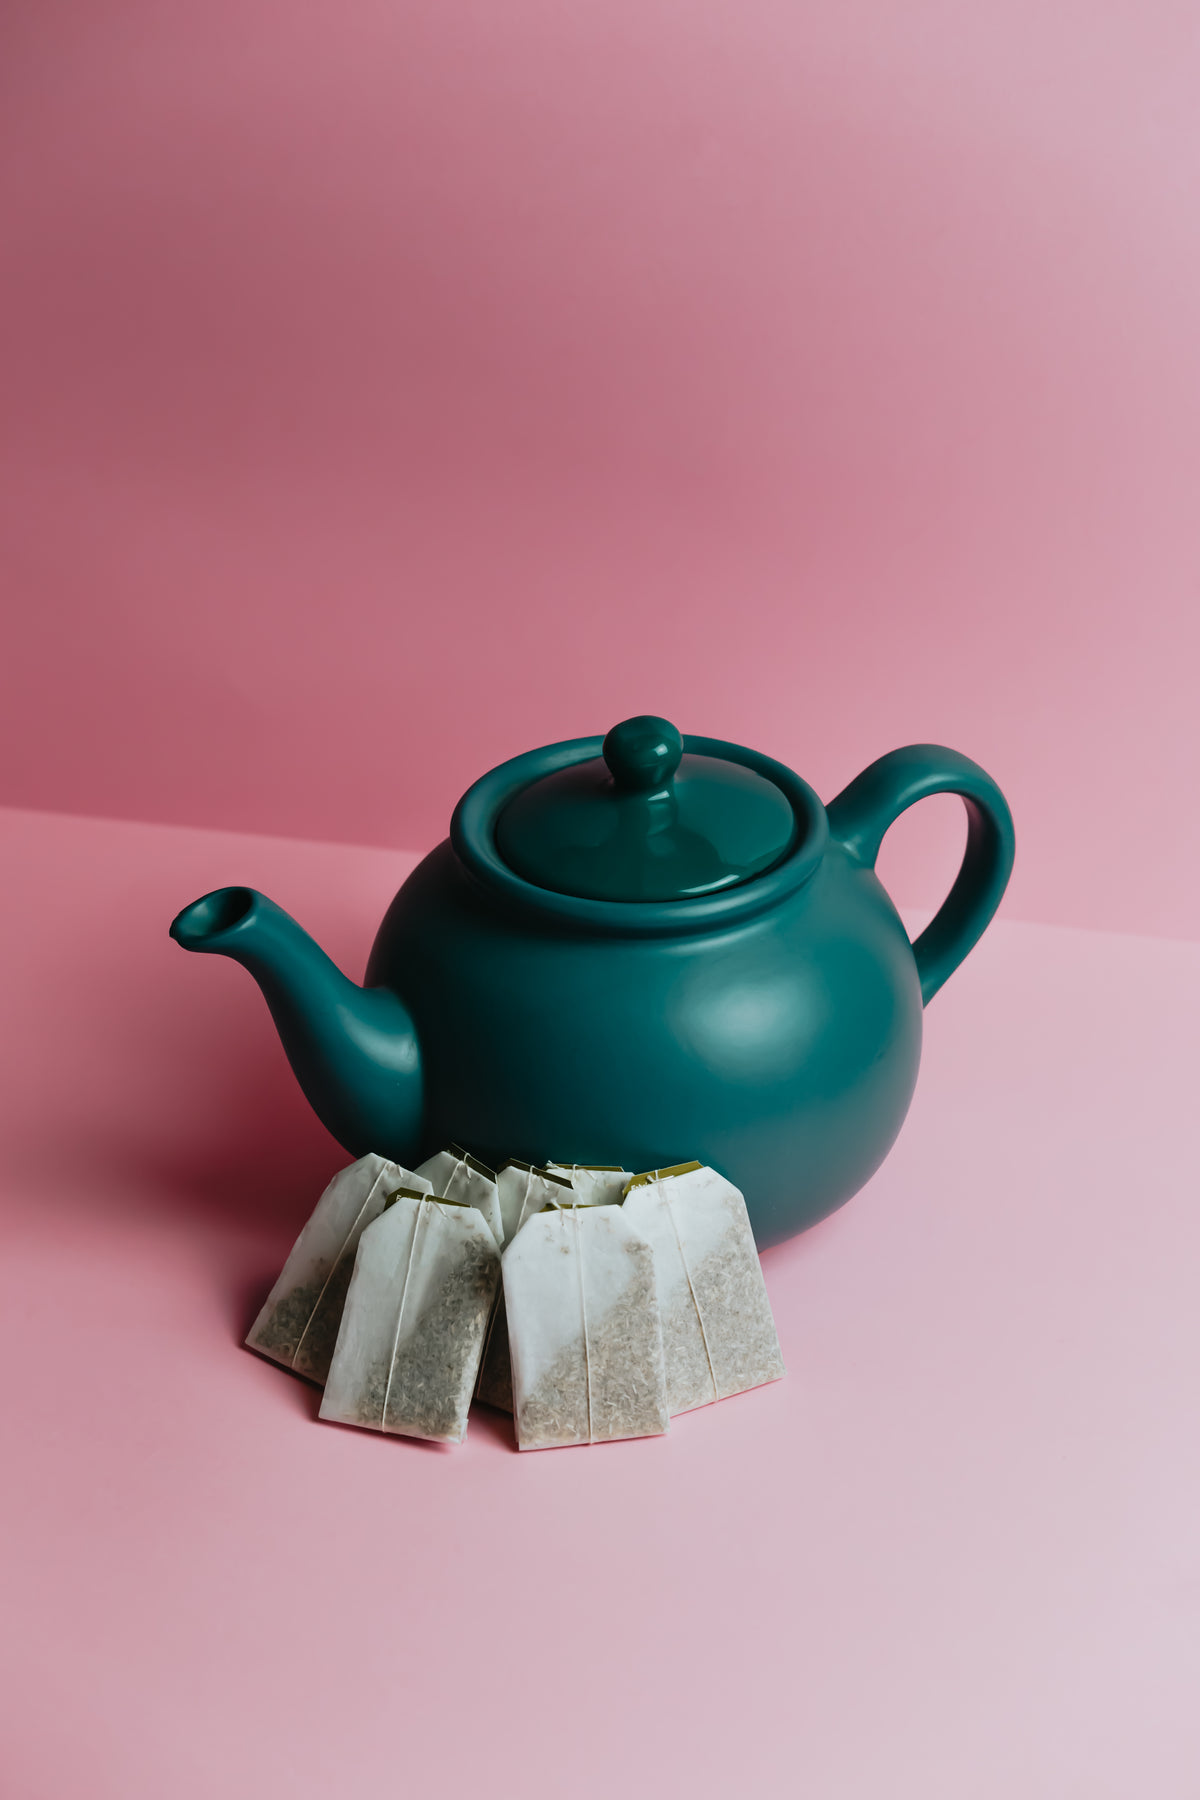 green teapot sits on a pink background with fresh tea bags